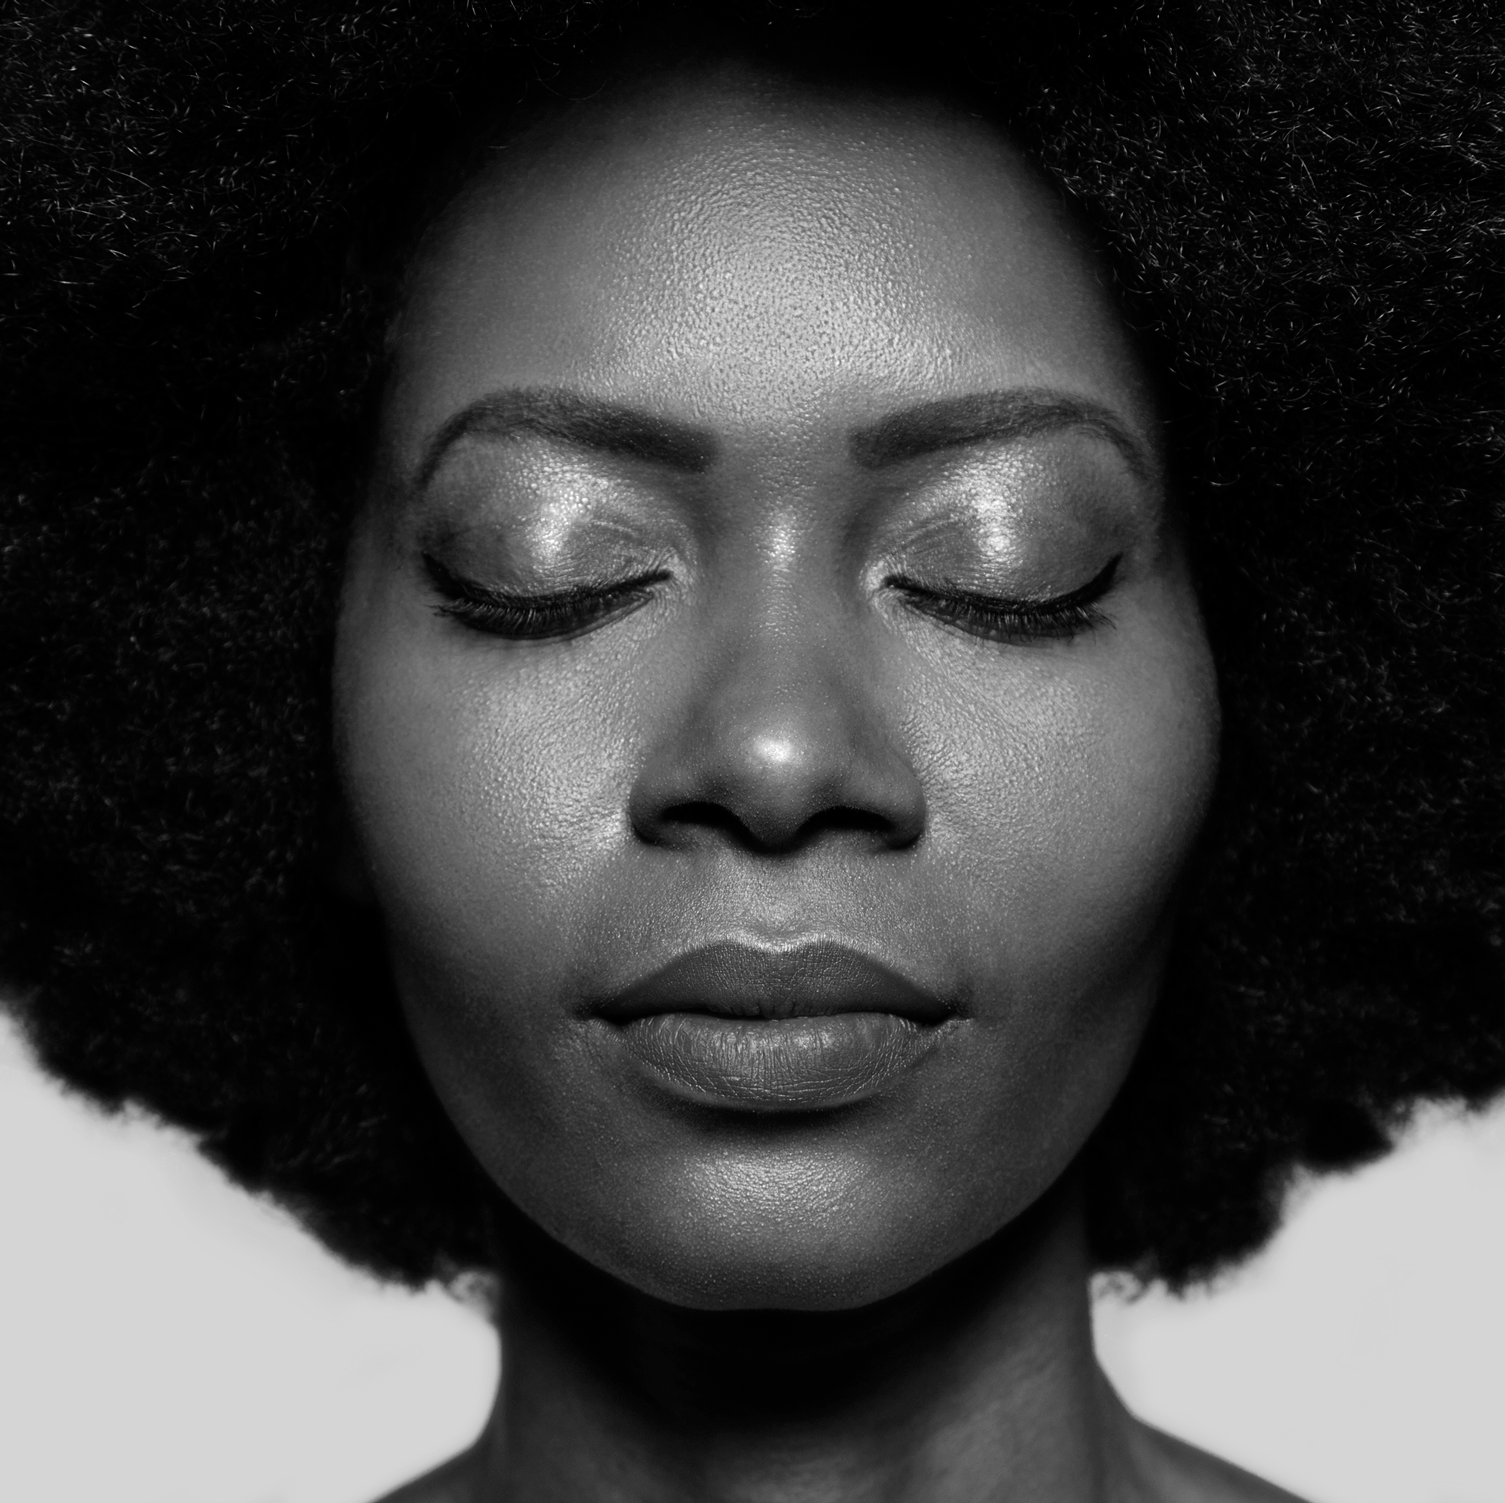 black woman with fro and eyes closed